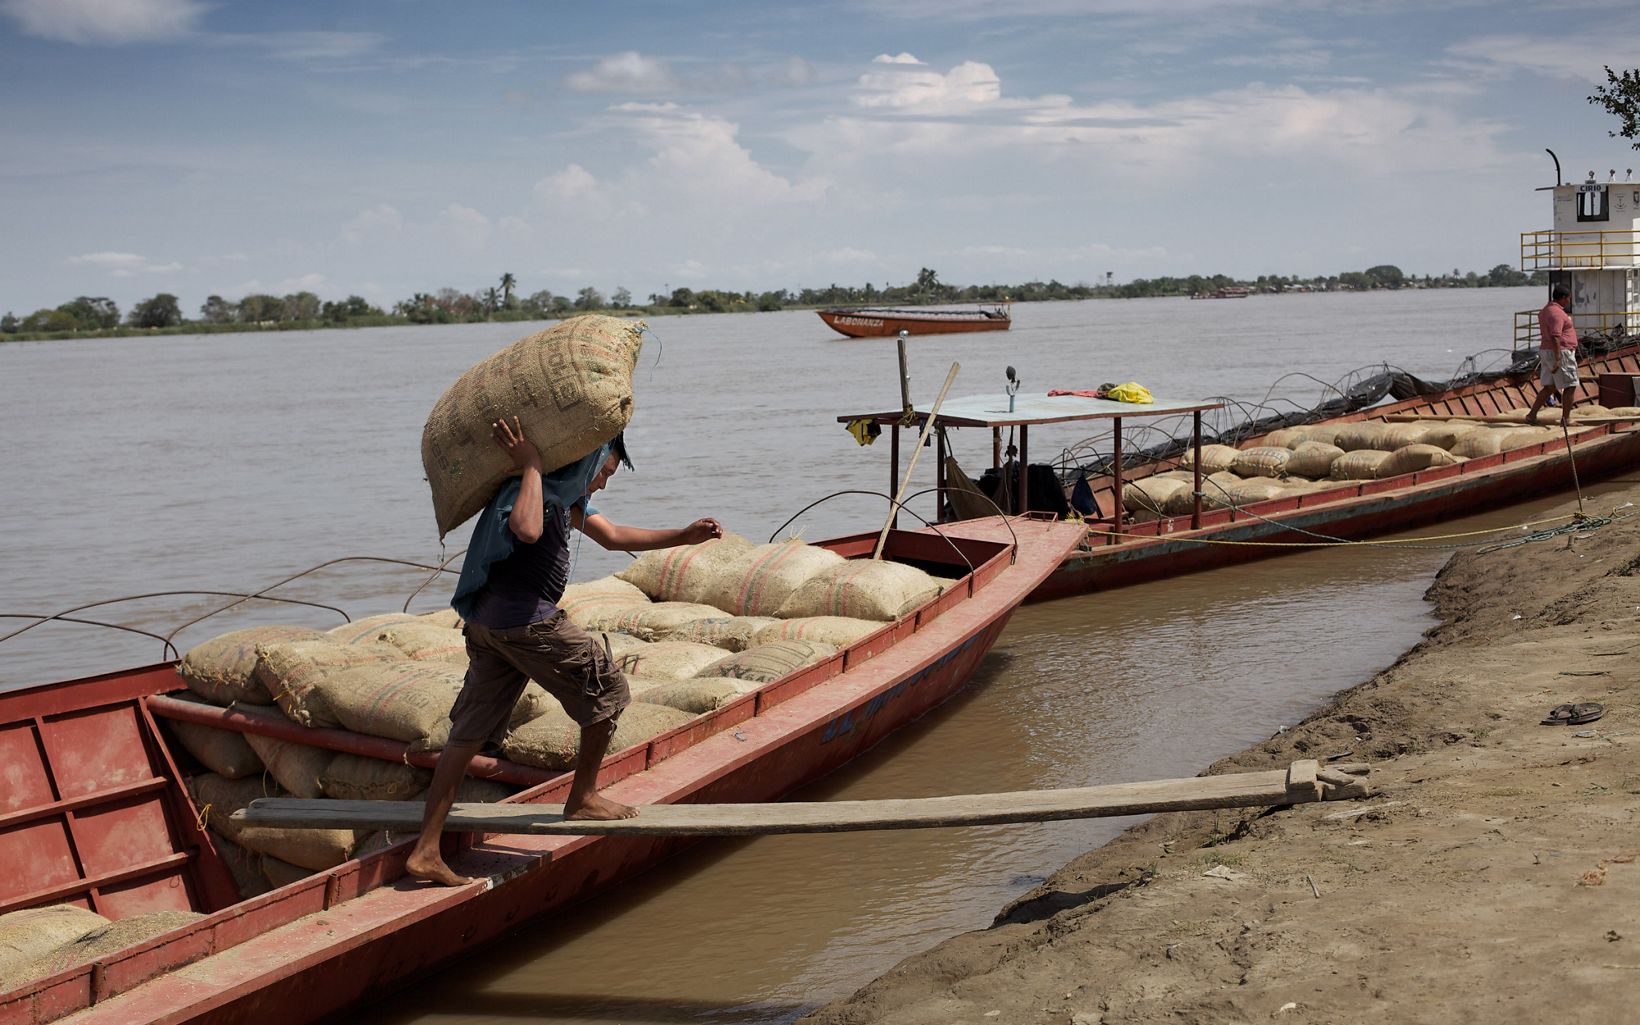 A man unloads goods from his boat on the Magdalena River in Colombia. 